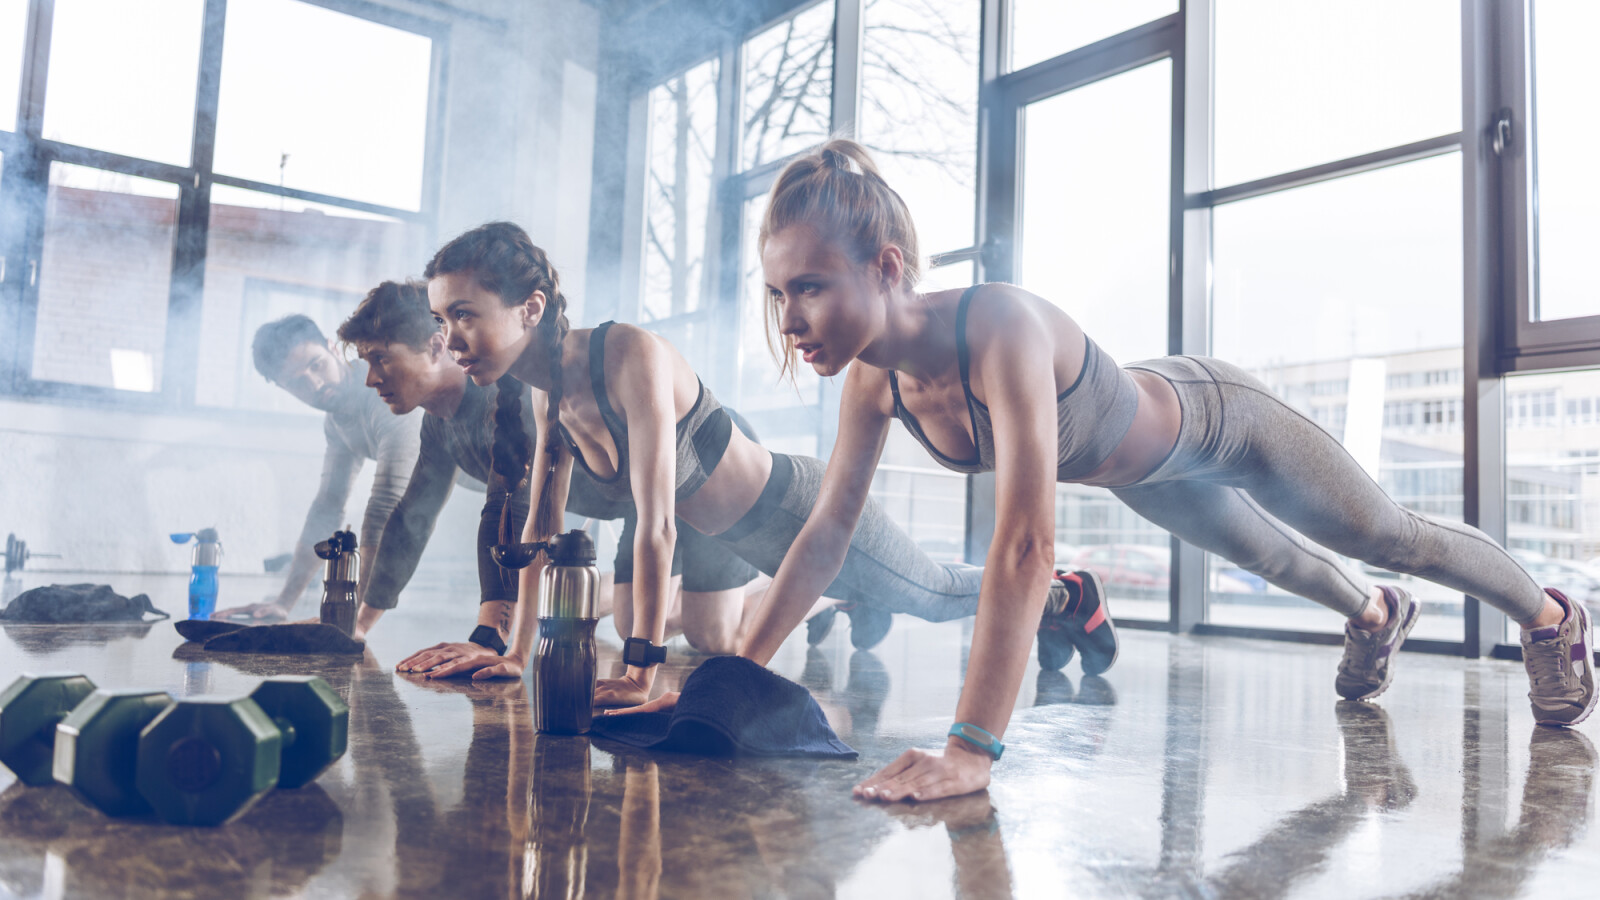 Suitable for home office Les Mills offers nearly 100 free home exercise videos